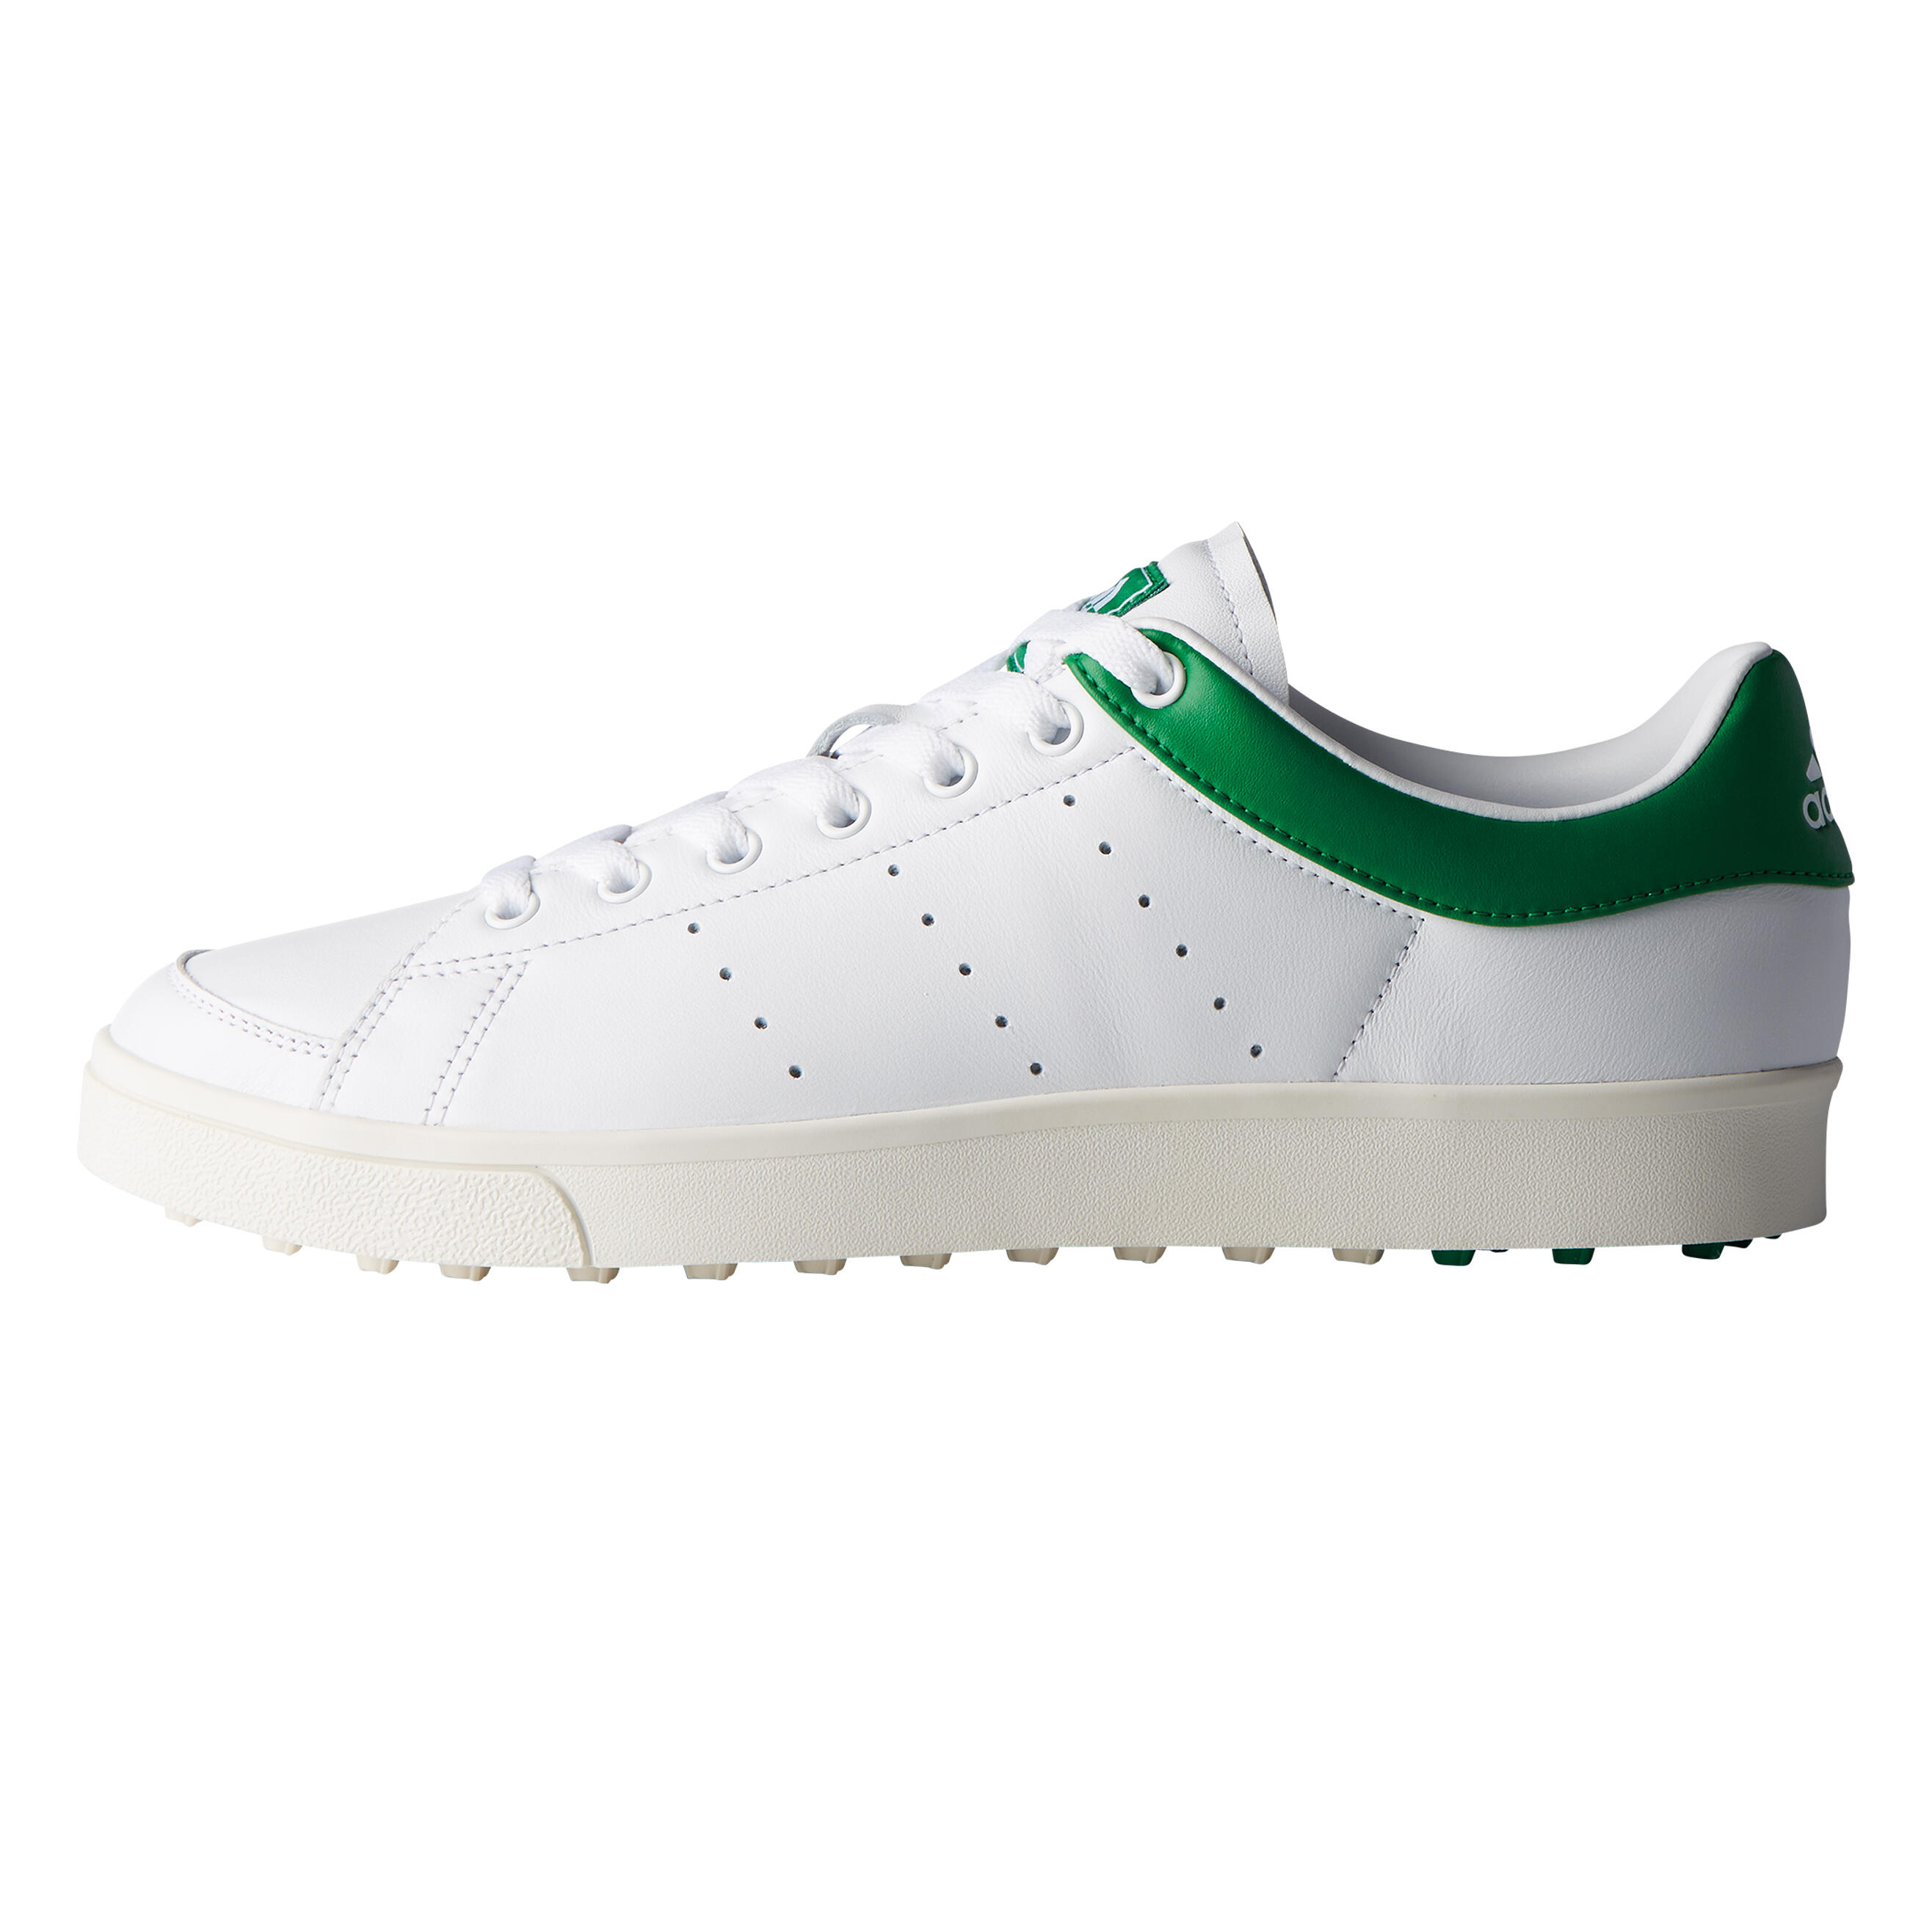 CHAUSSURES DE GOLF HOMME ADICROSS Classic blanches